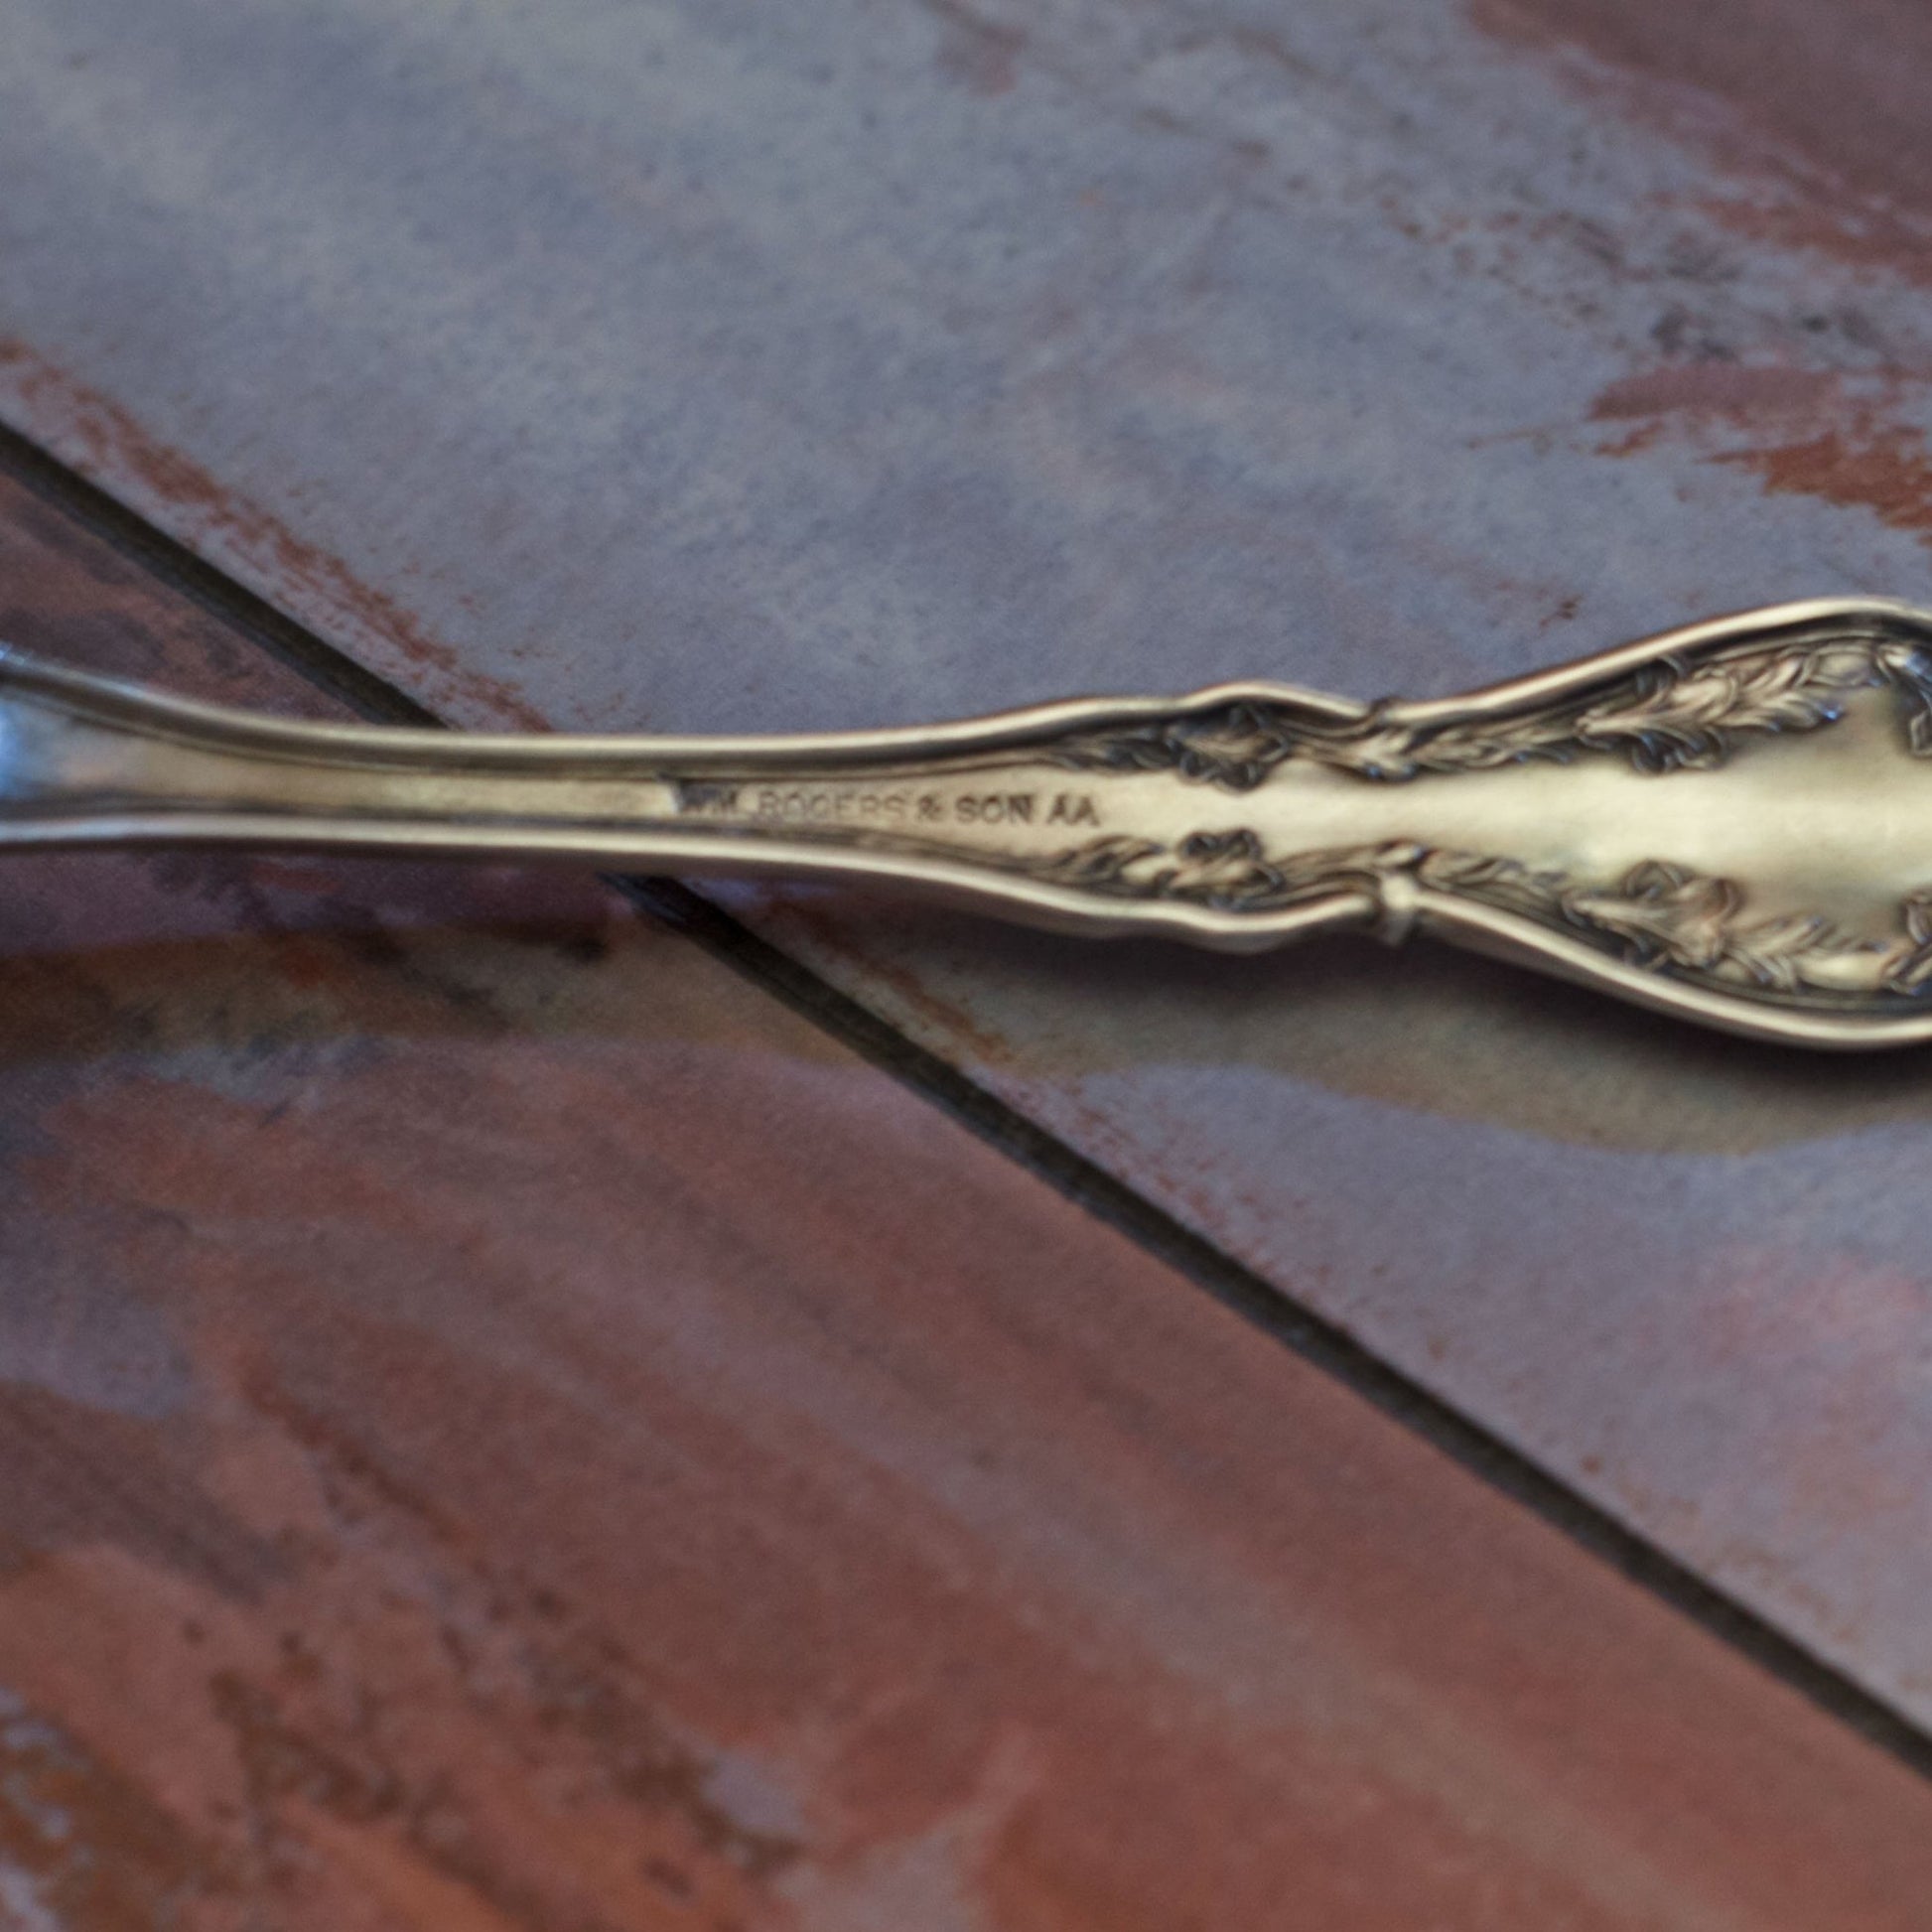 CHESTER SILVER PLATE SUGAR SPOON by William Rogers & Son